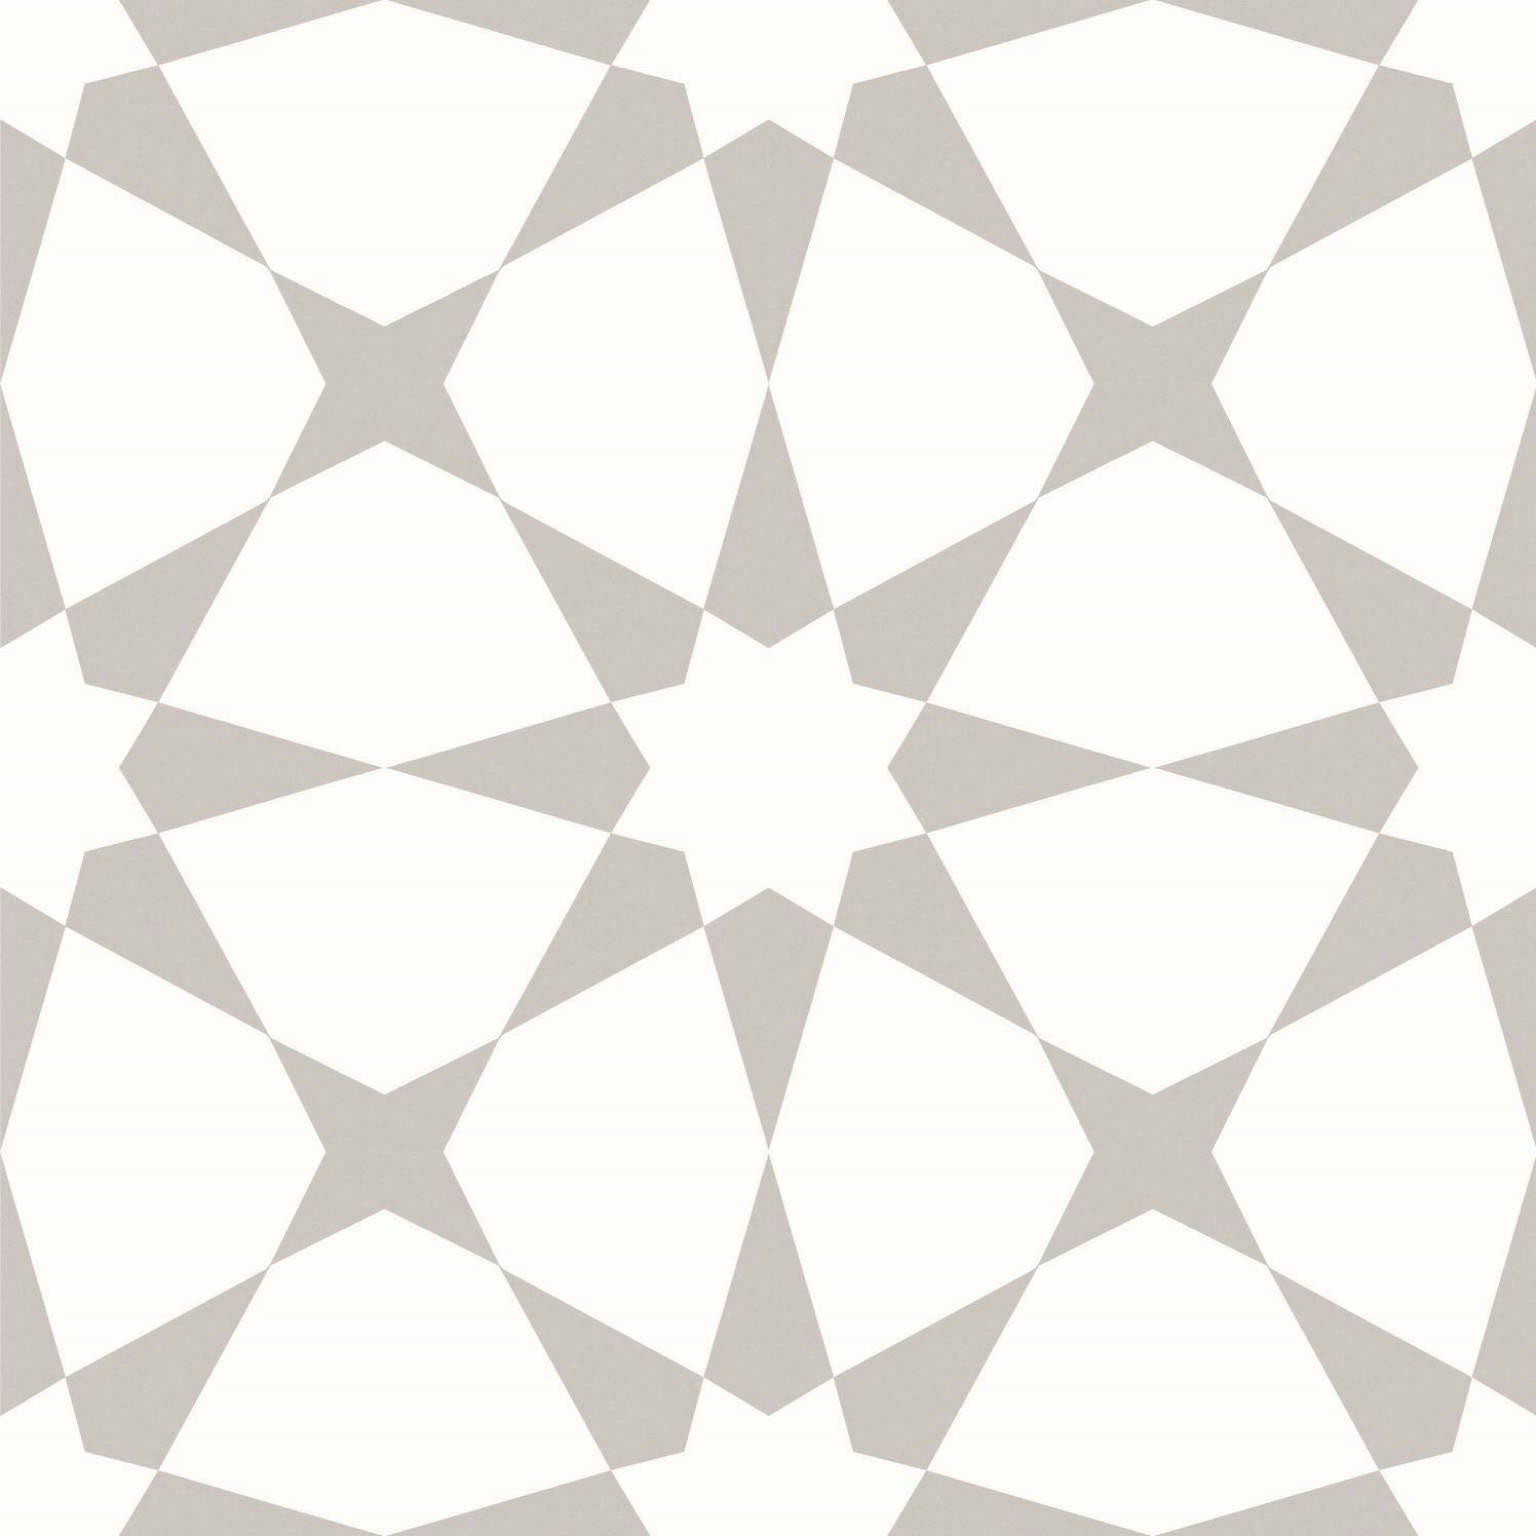 Dorian Gris Star | Stones & More | Finest selection of Mosaics, Glass, Tile and Stone